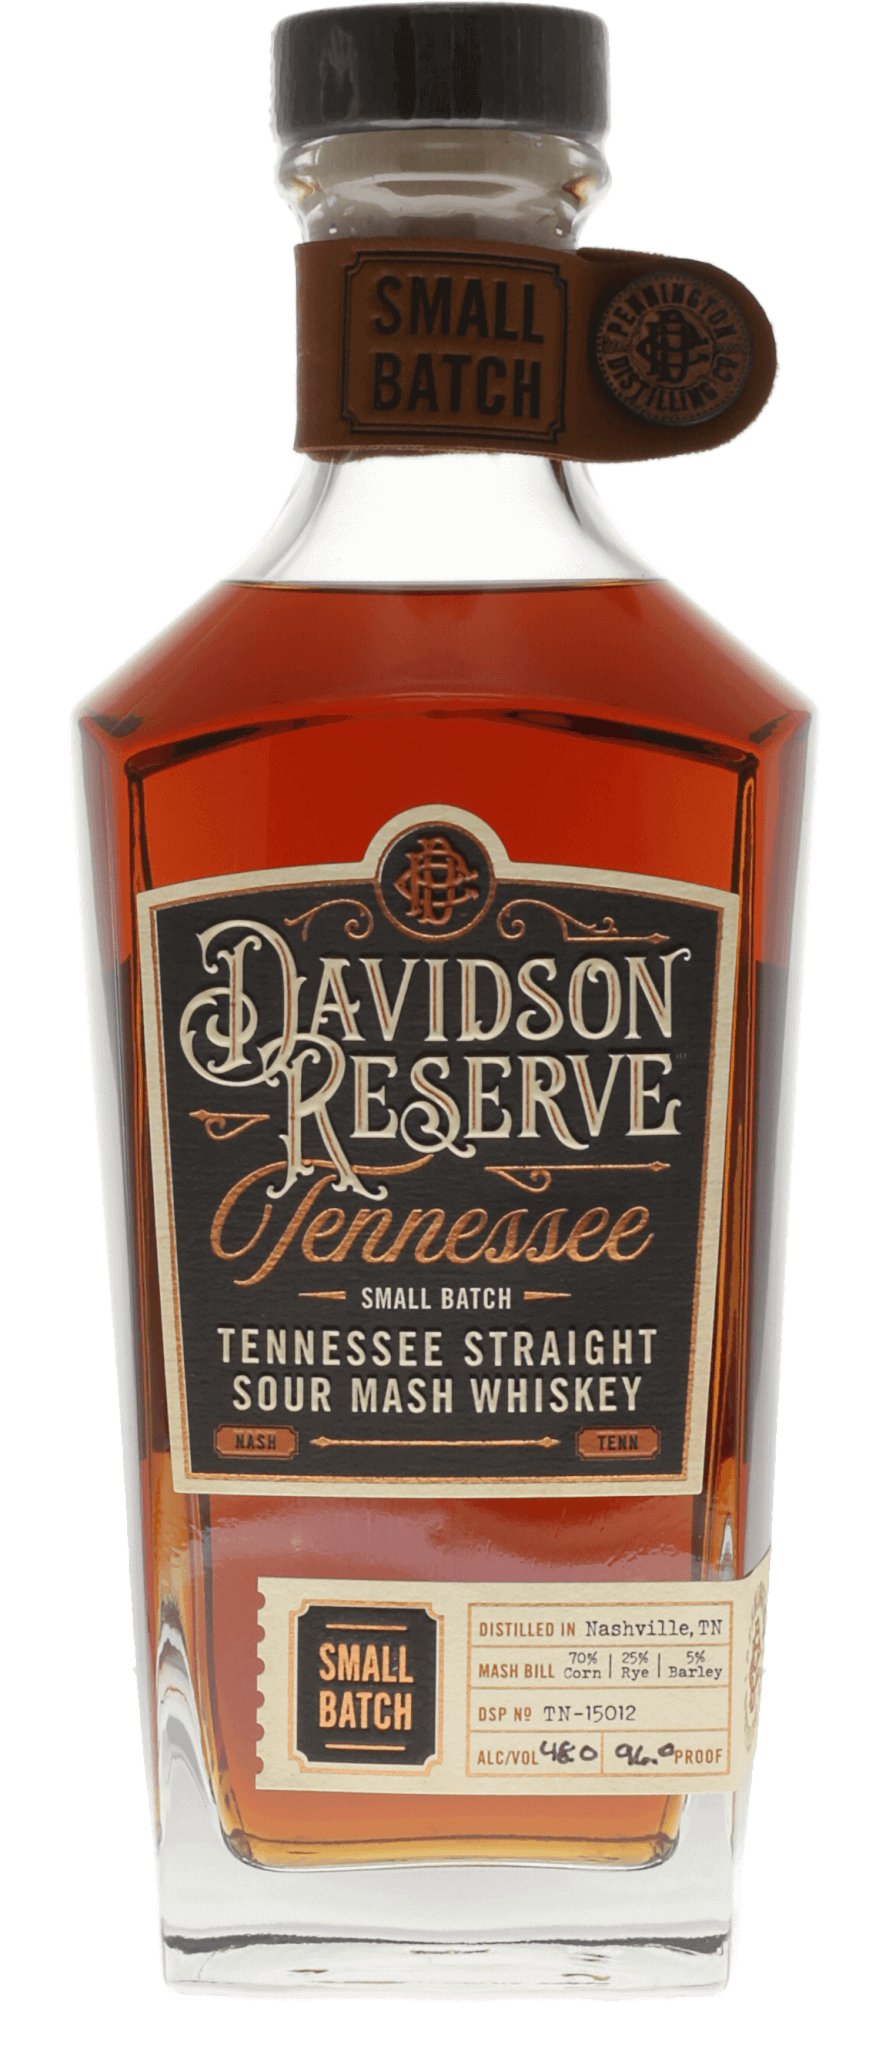 Davidson Reserve Tennessee Sour Mash Whiskey